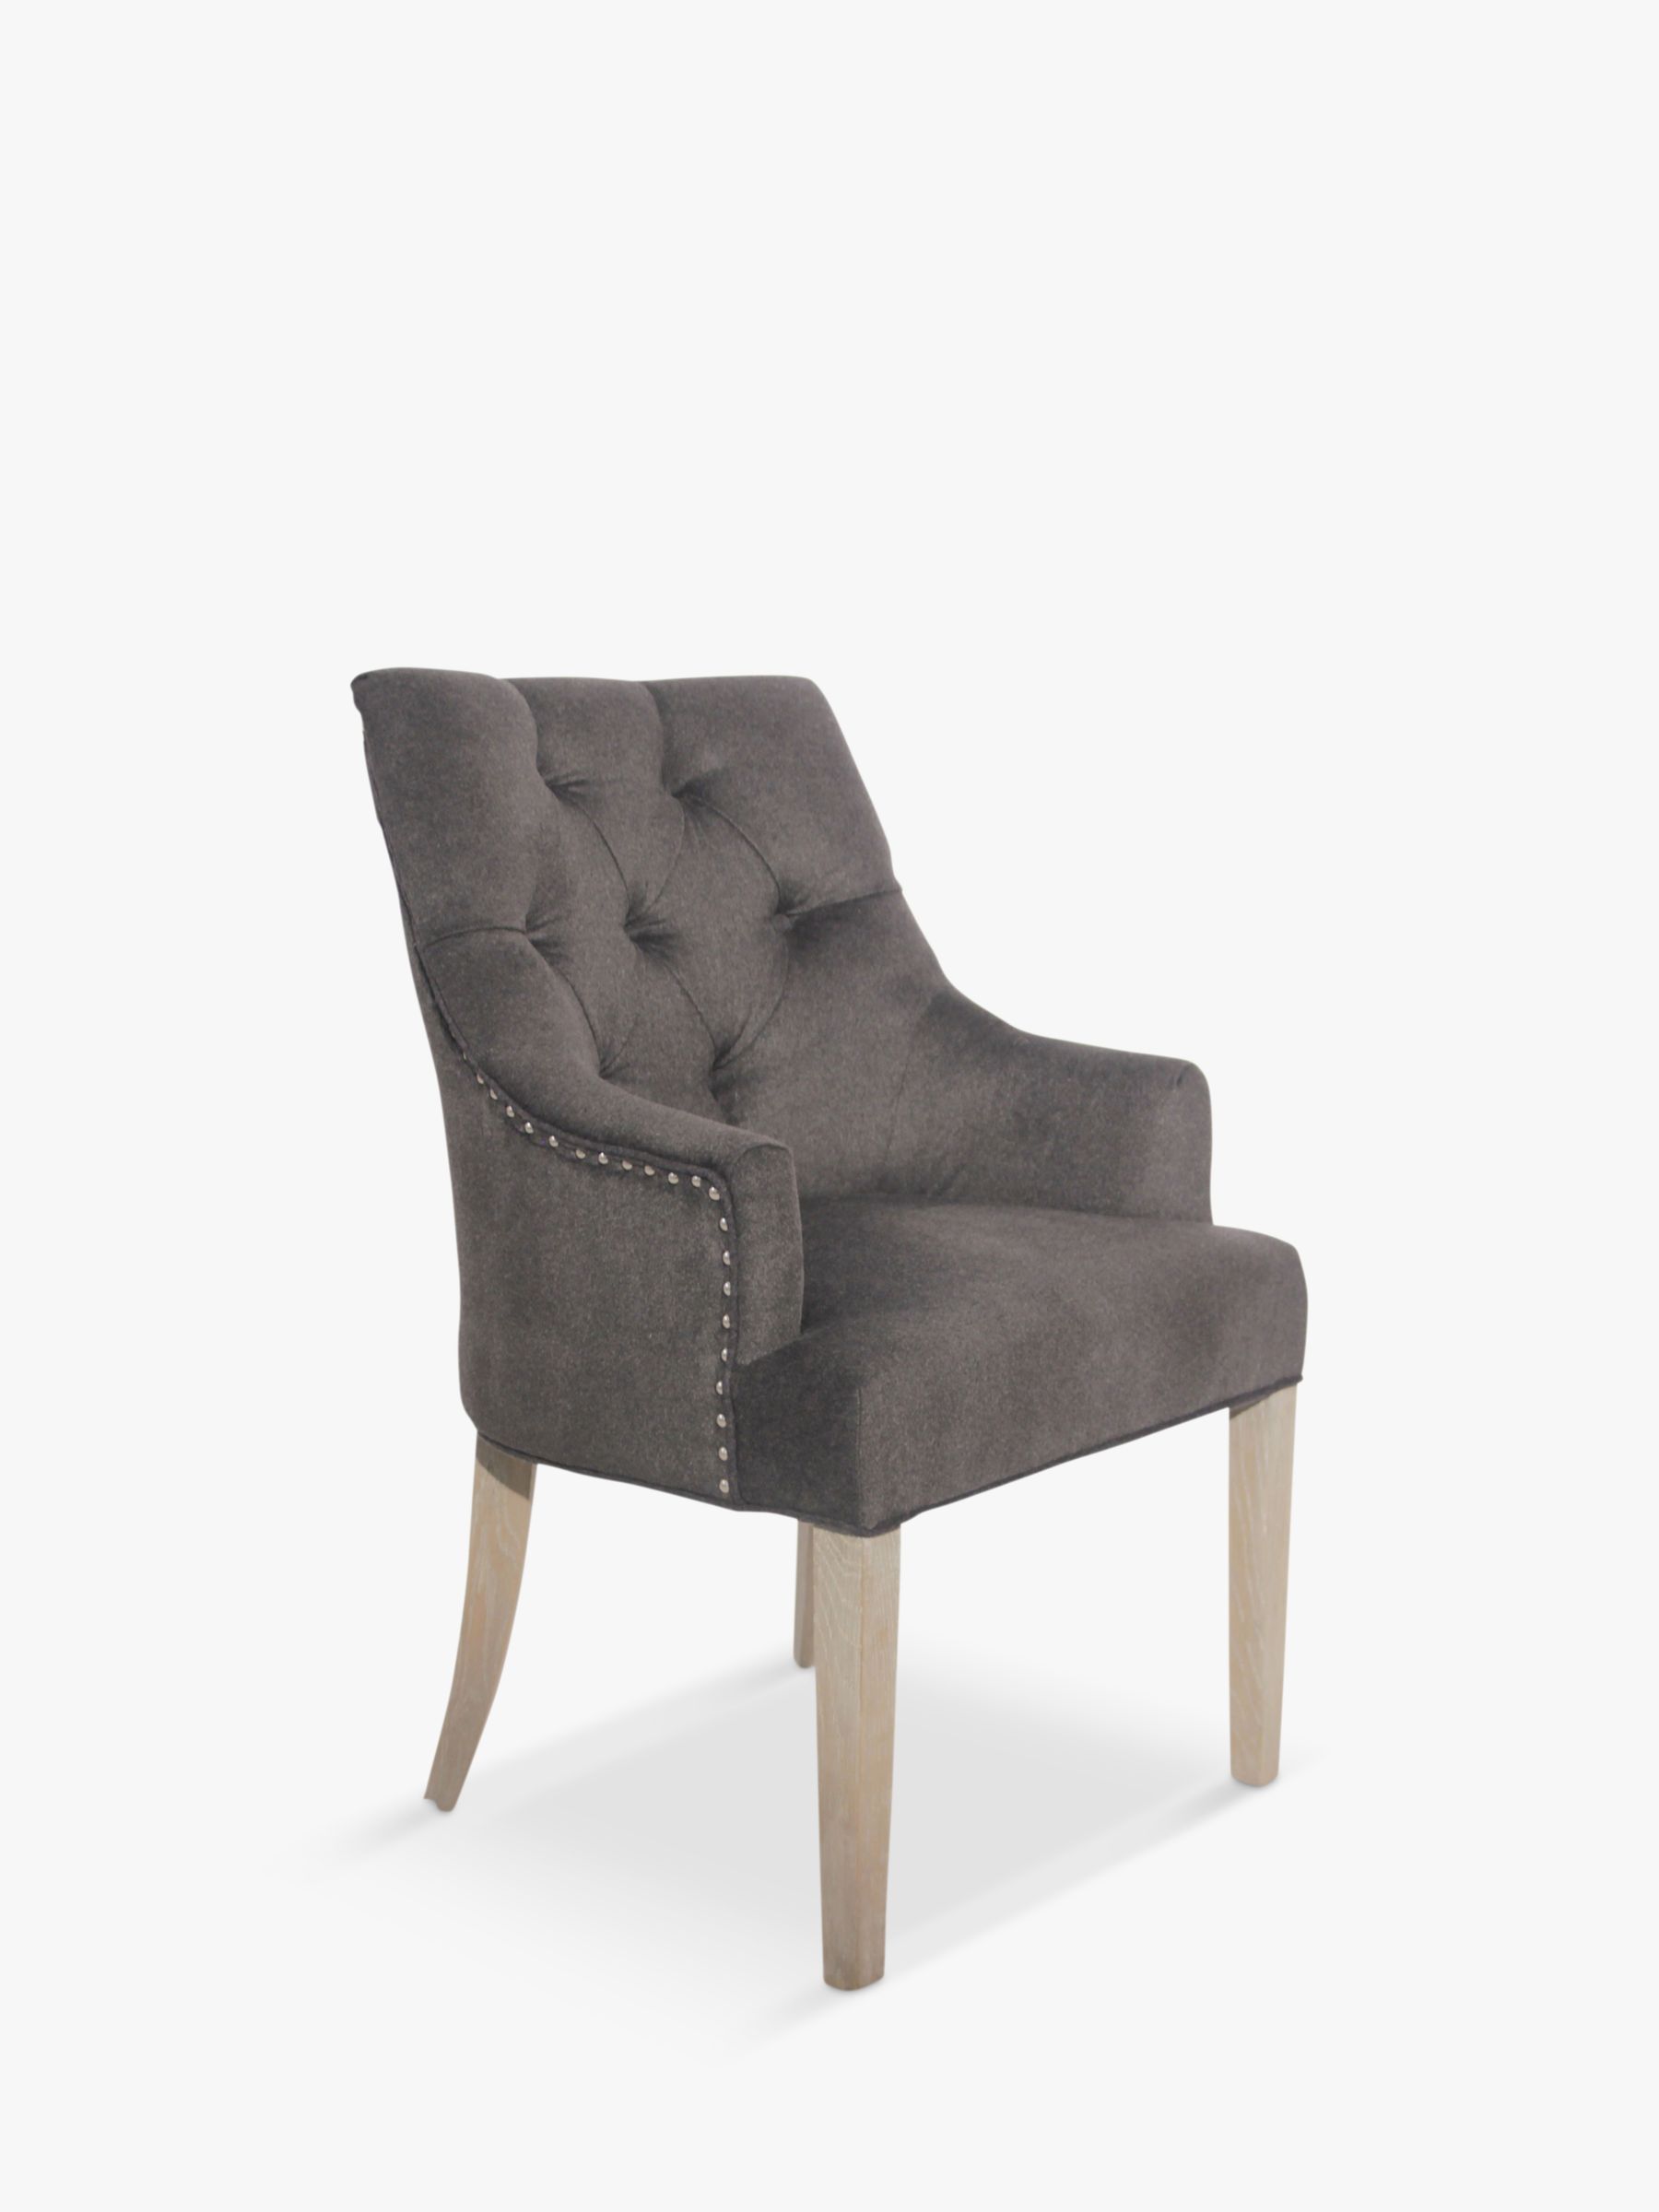 Photo of One.world st james wool & oak wood stud detail carver dining chair charcoal grey